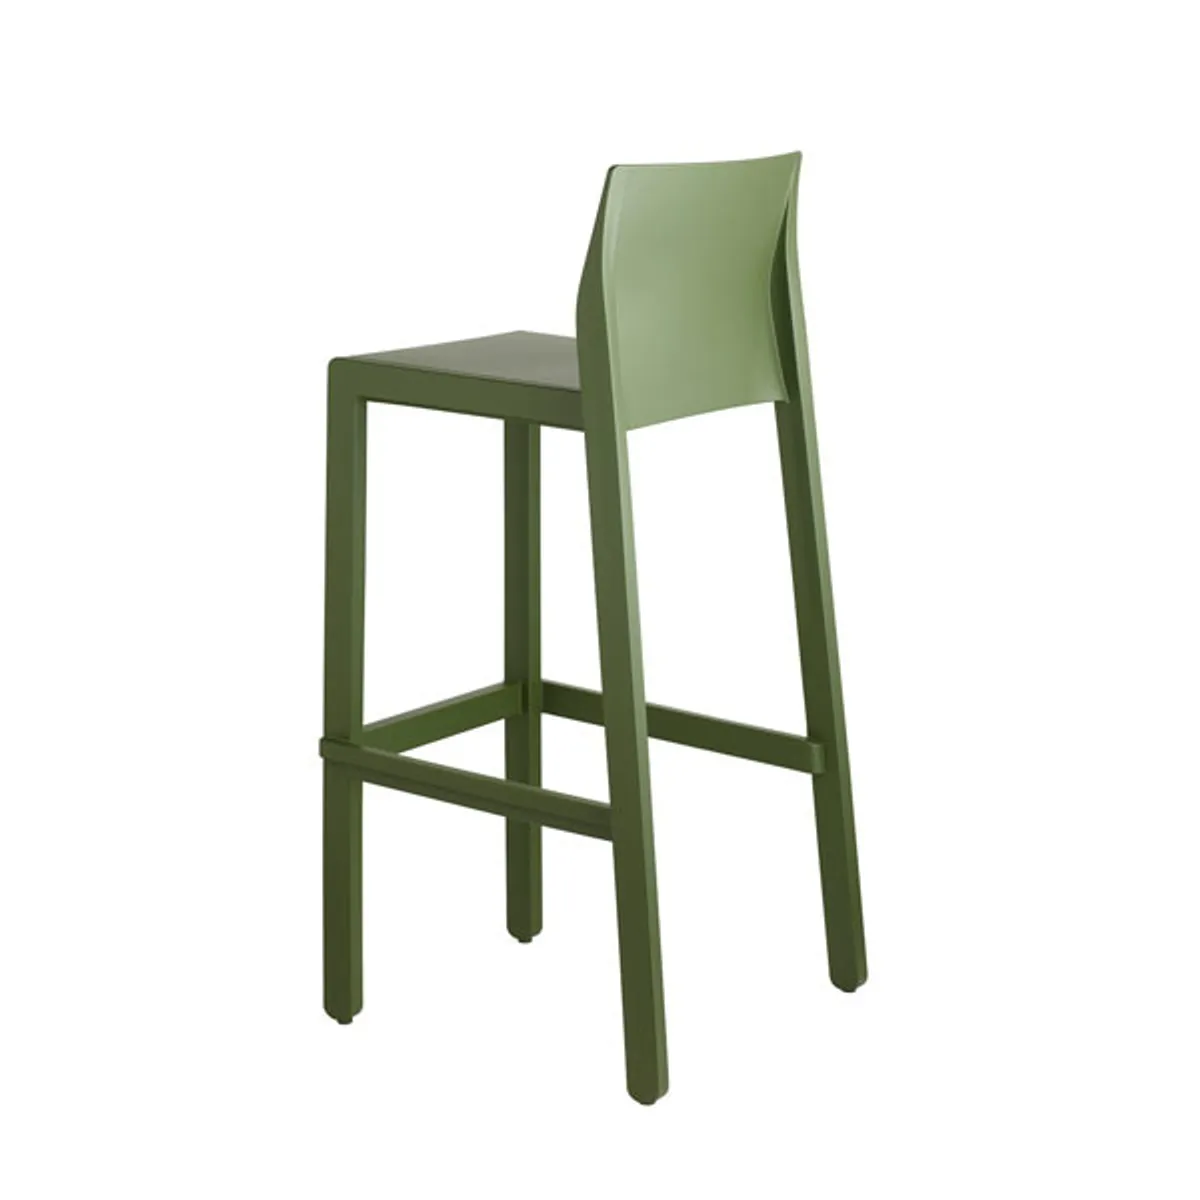 Remi bar stool bar height 3 Inside Out Contracts